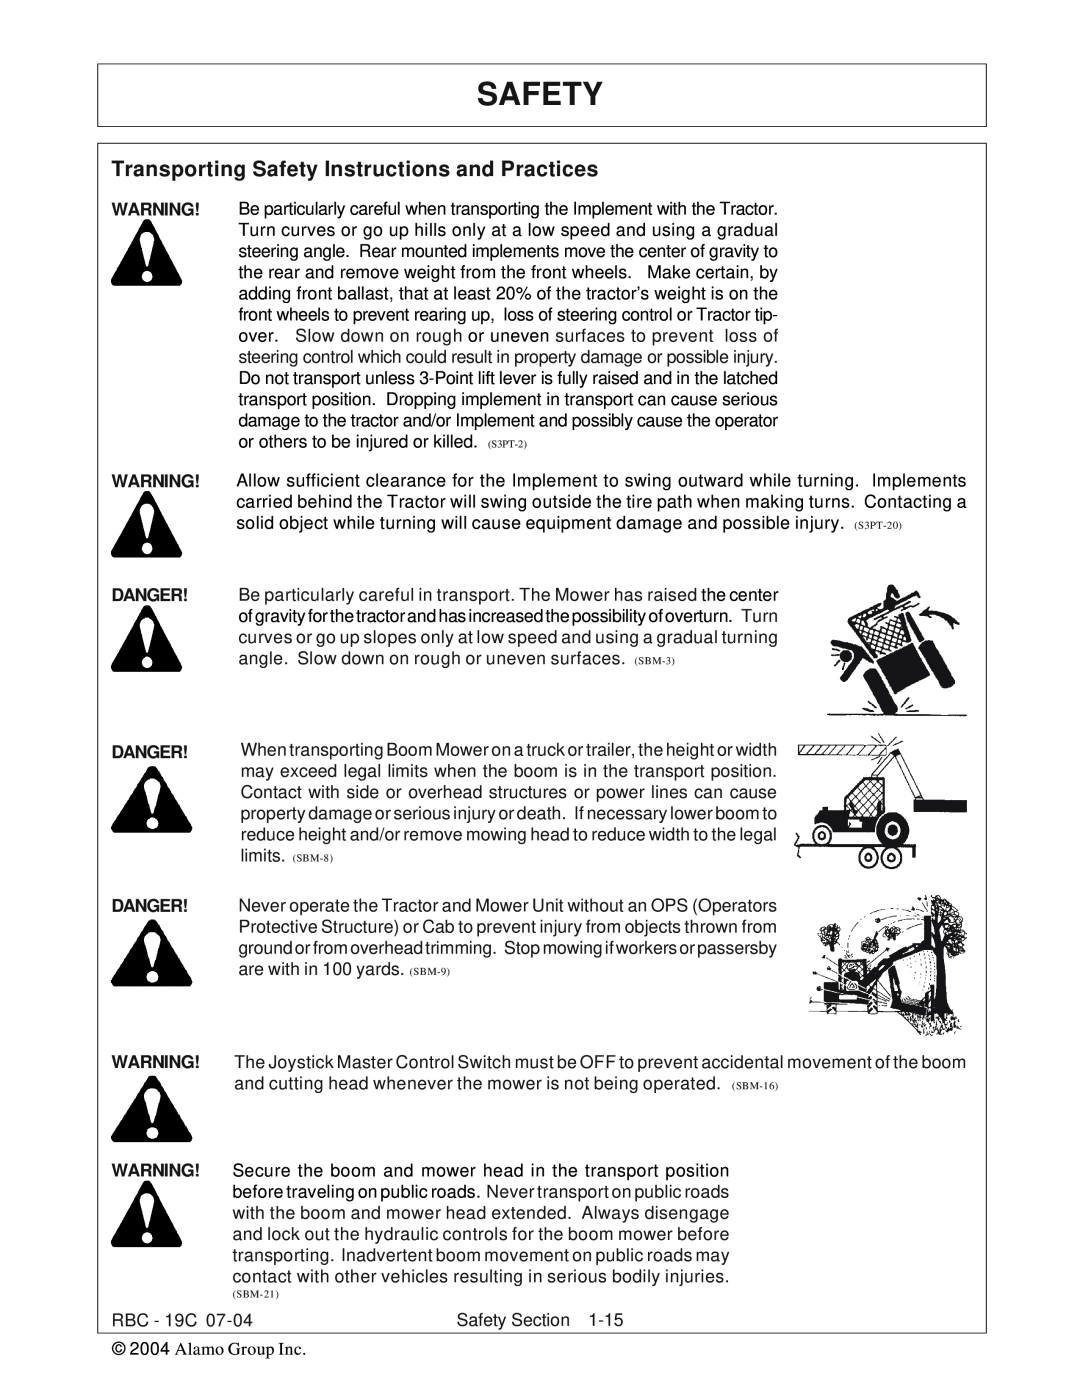 Tiger RBF-19C manual Transporting Safety Instructions and Practices, Danger 